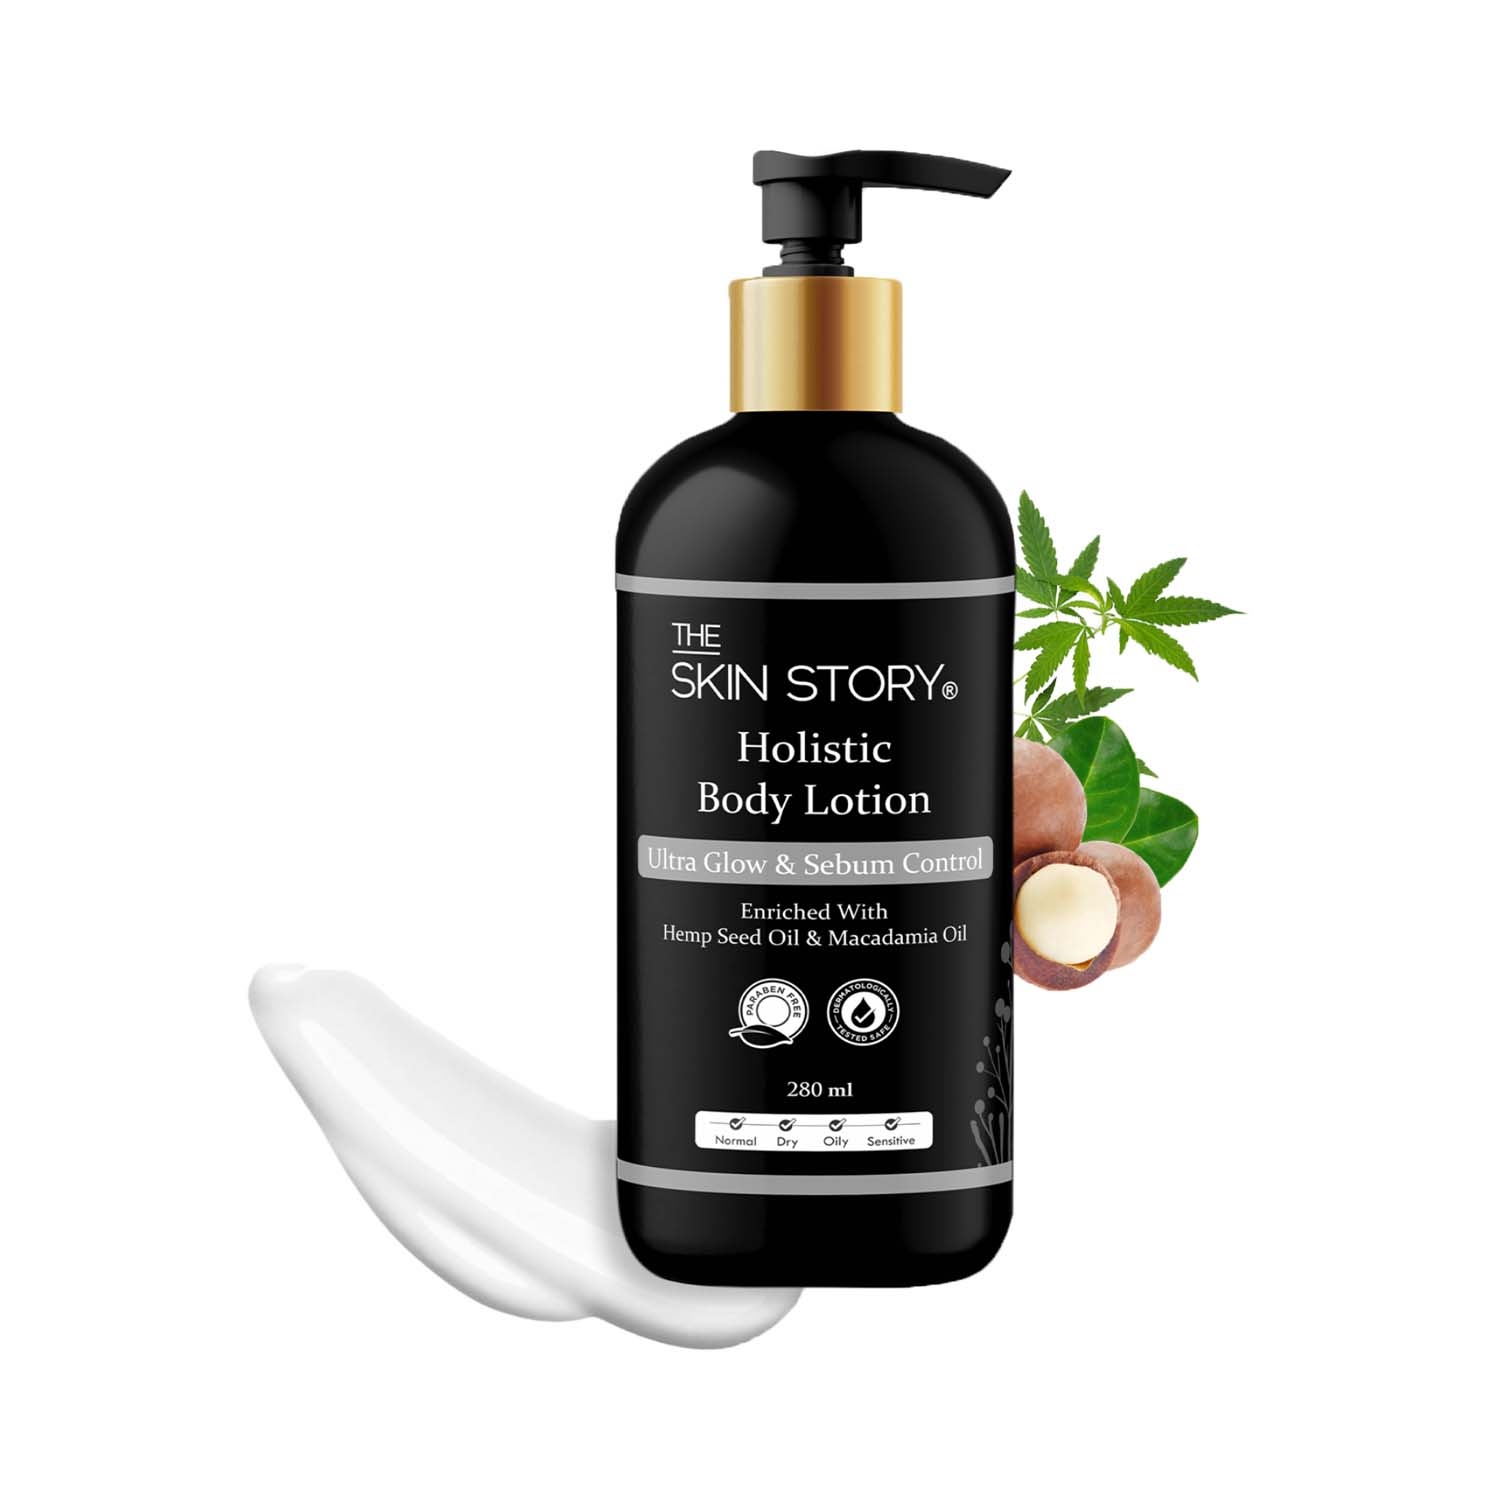 The Skin Story | The Skin Story Holistic Body Lotion (280ml)